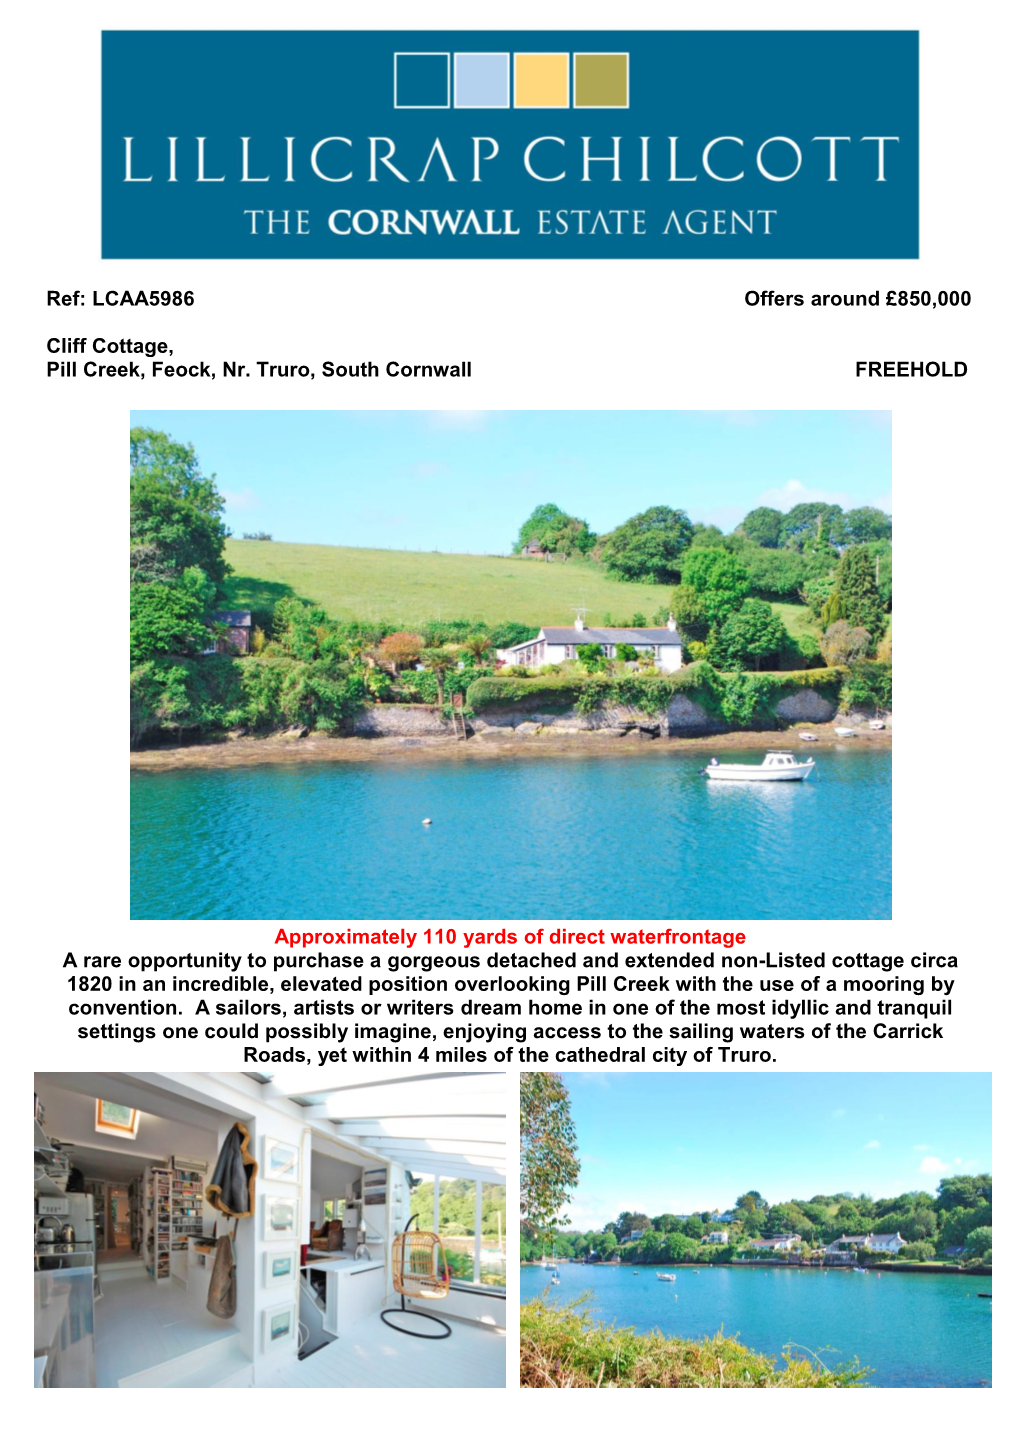 LCAA5986 Offers Around £850000 Cliff Cottage, Pill Creek, Feock, Nr